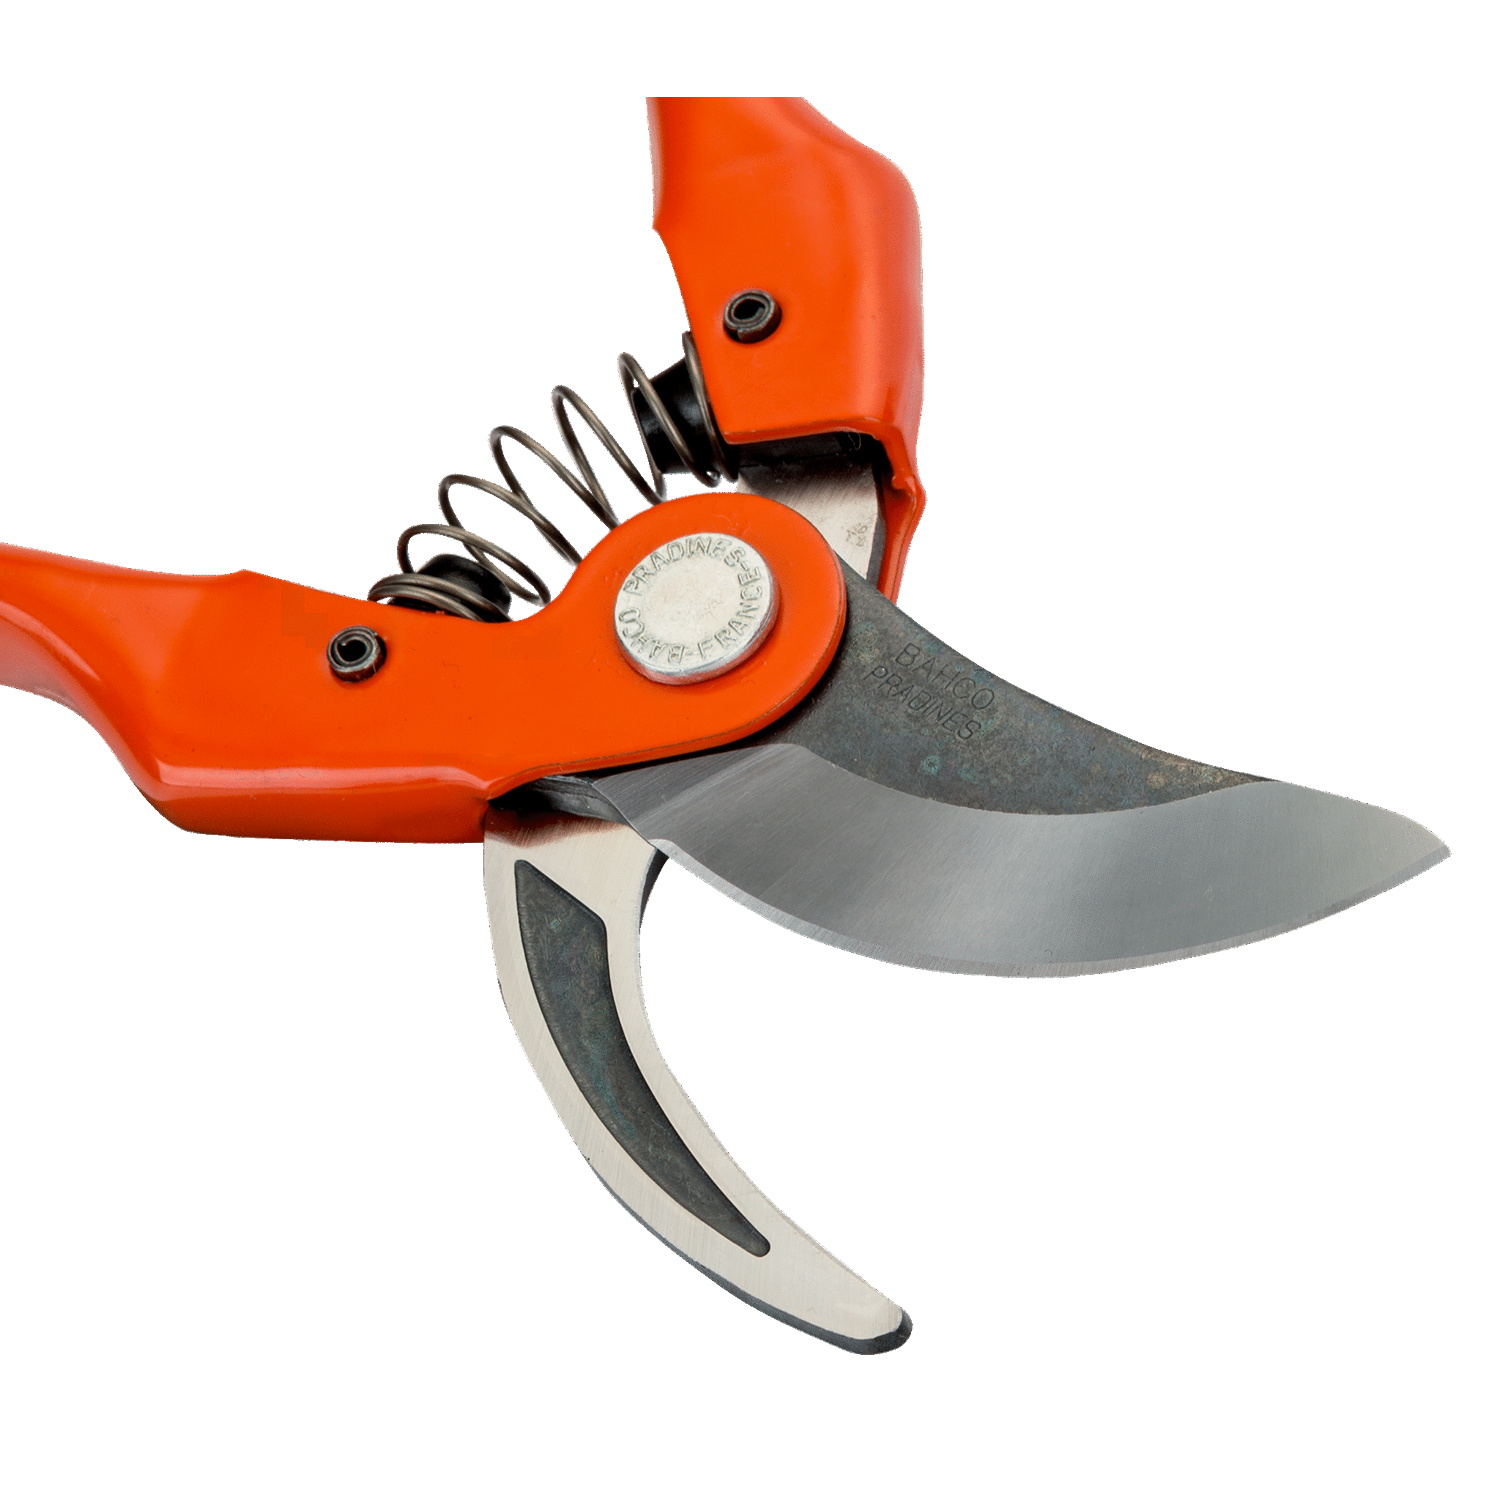 BAHCO P126 Bypass Secateurs with Stamped/Pressed Steel Handle - Premium Secateurs from BAHCO - Shop now at Yew Aik.